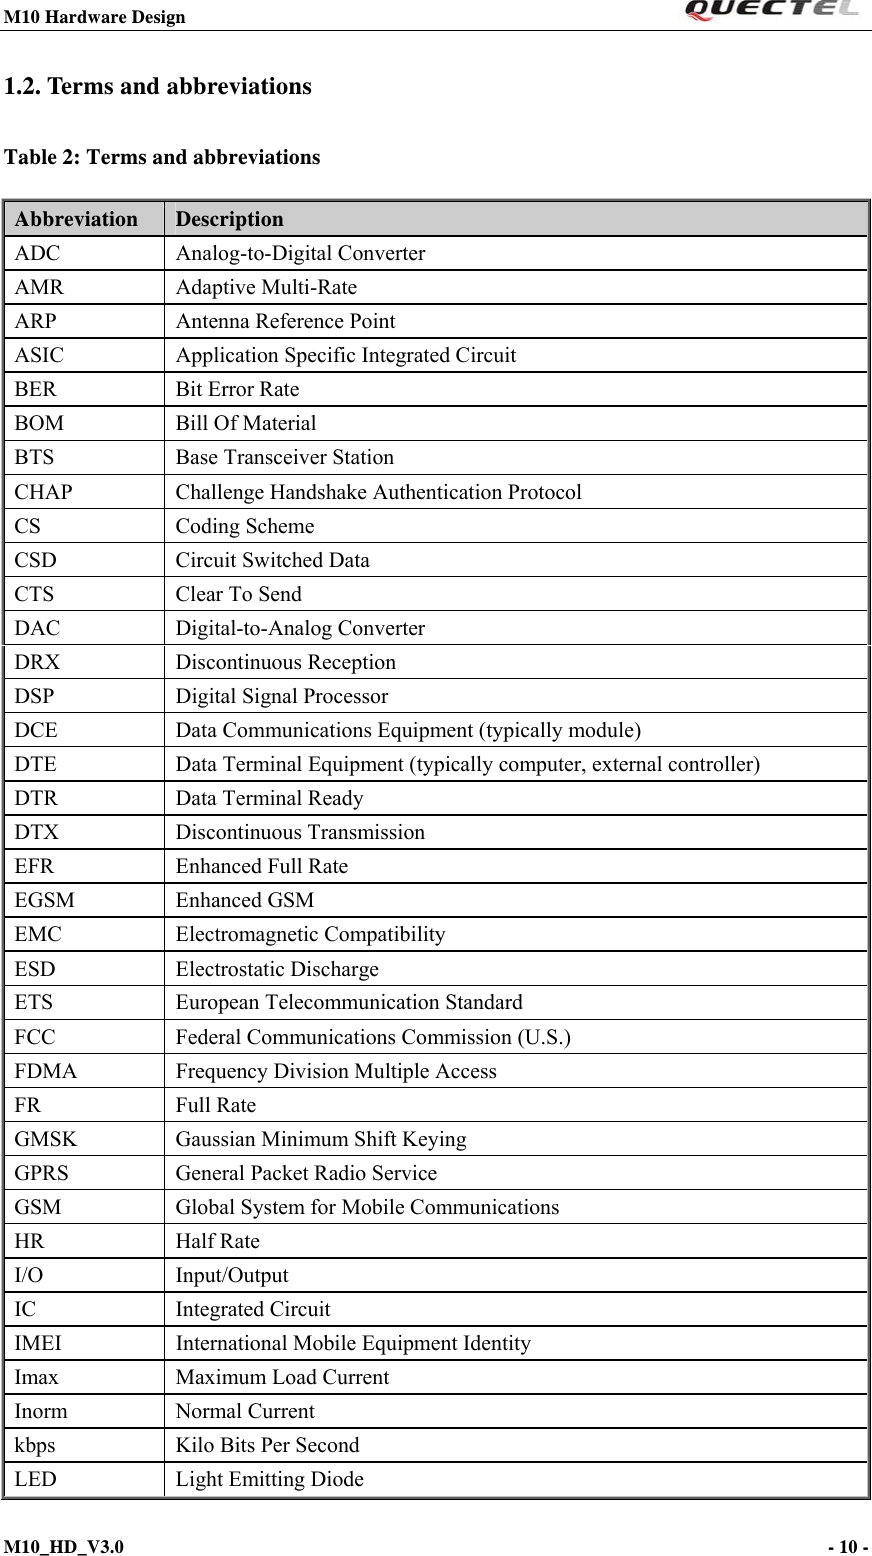 M10 Hardware Design                                                                 M10_HD_V3.0                                                                      - 10 -  1.2. Terms and abbreviations Table 2: Terms and abbreviations Abbreviation   Description ADC   Analog-to-Digital Converter AMR Adaptive Multi-Rate ARP   Antenna Reference Point ASIC    Application Specific Integrated Circuit BER   Bit Error Rate BOM  Bill Of Material BTS    Base Transceiver Station CHAP    Challenge Handshake Authentication Protocol CS   Coding Scheme CSD    Circuit Switched Data CTS    Clear To Send DAC   Digital-to-Analog Converter DRX   Discontinuous Reception DSP   Digital Signal Processor DCE  Data Communications Equipment (typically module) DTE    Data Terminal Equipment (typically computer, external controller) DTR    Data Terminal Ready DTX   Discontinuous Transmission EFR    Enhanced Full Rate EGSM   Enhanced GSM EMC   Electromagnetic Compatibility ESD   Electrostatic Discharge ETS    European Telecommunication Standard FCC    Federal Communications Commission (U.S.) FDMA    Frequency Division Multiple Access FR   Full Rate GMSK  Gaussian Minimum Shift Keying GPRS    General Packet Radio Service GSM    Global System for Mobile Communications HR   Half Rate I/O   Input/Output IC   Integrated Circuit IMEI    International Mobile Equipment Identity Imax  Maximum Load Current Inorm Normal Current kbps    Kilo Bits Per Second LED    Light Emitting Diode 